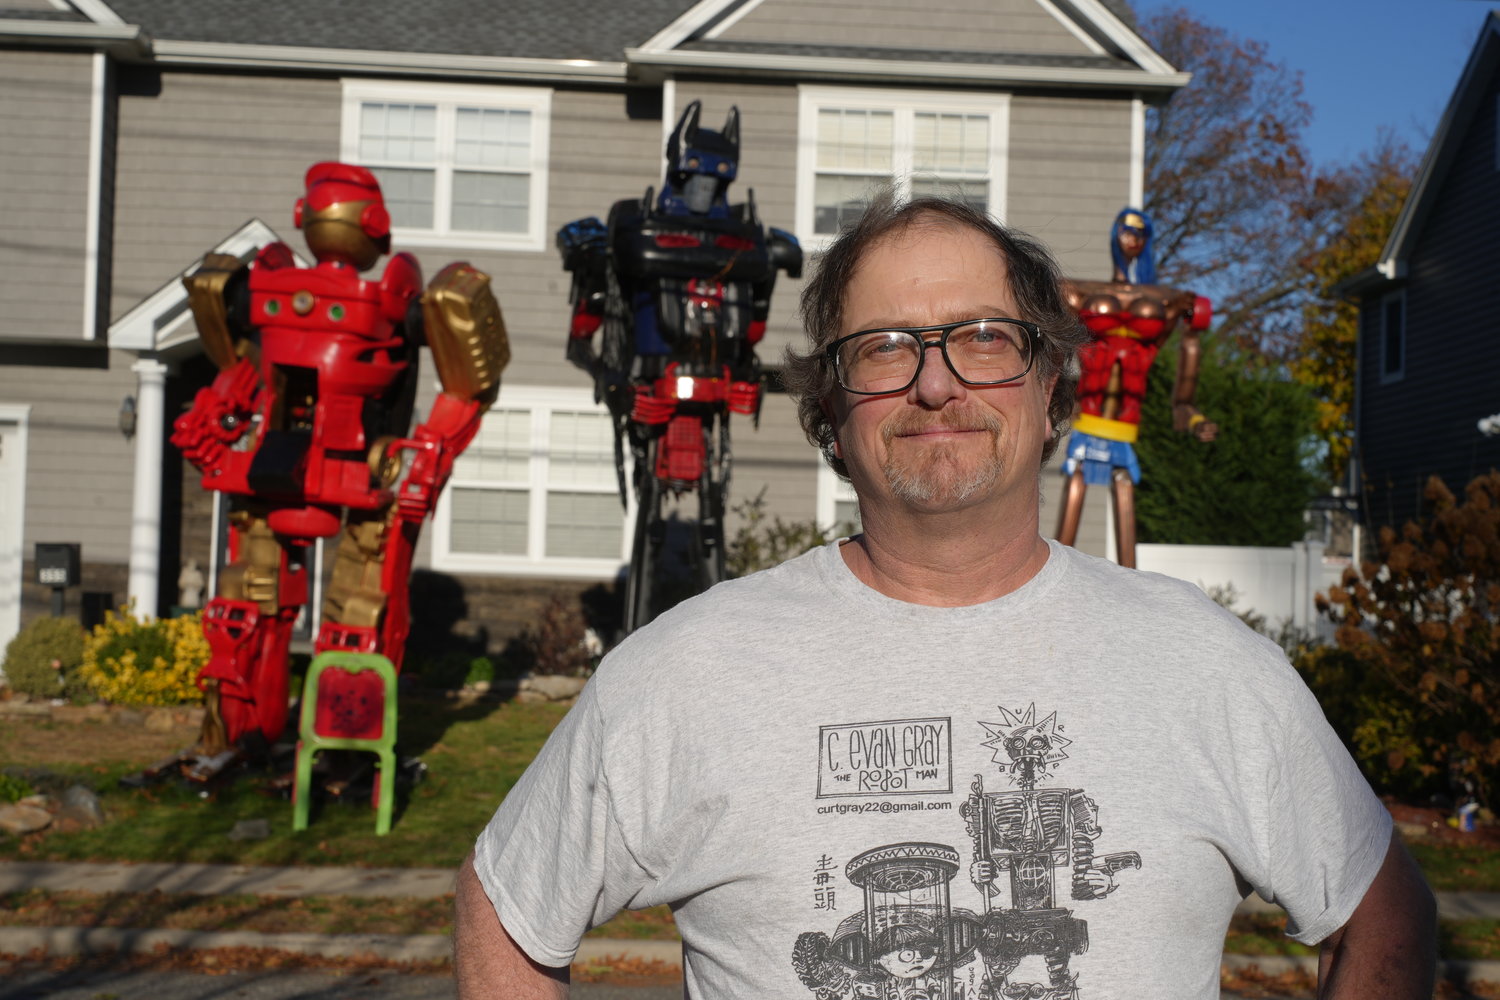 Curt Gray has been creating sculptures since he was a child. After moving to East Meadow in 1998, he decided to take his hobby to another level.